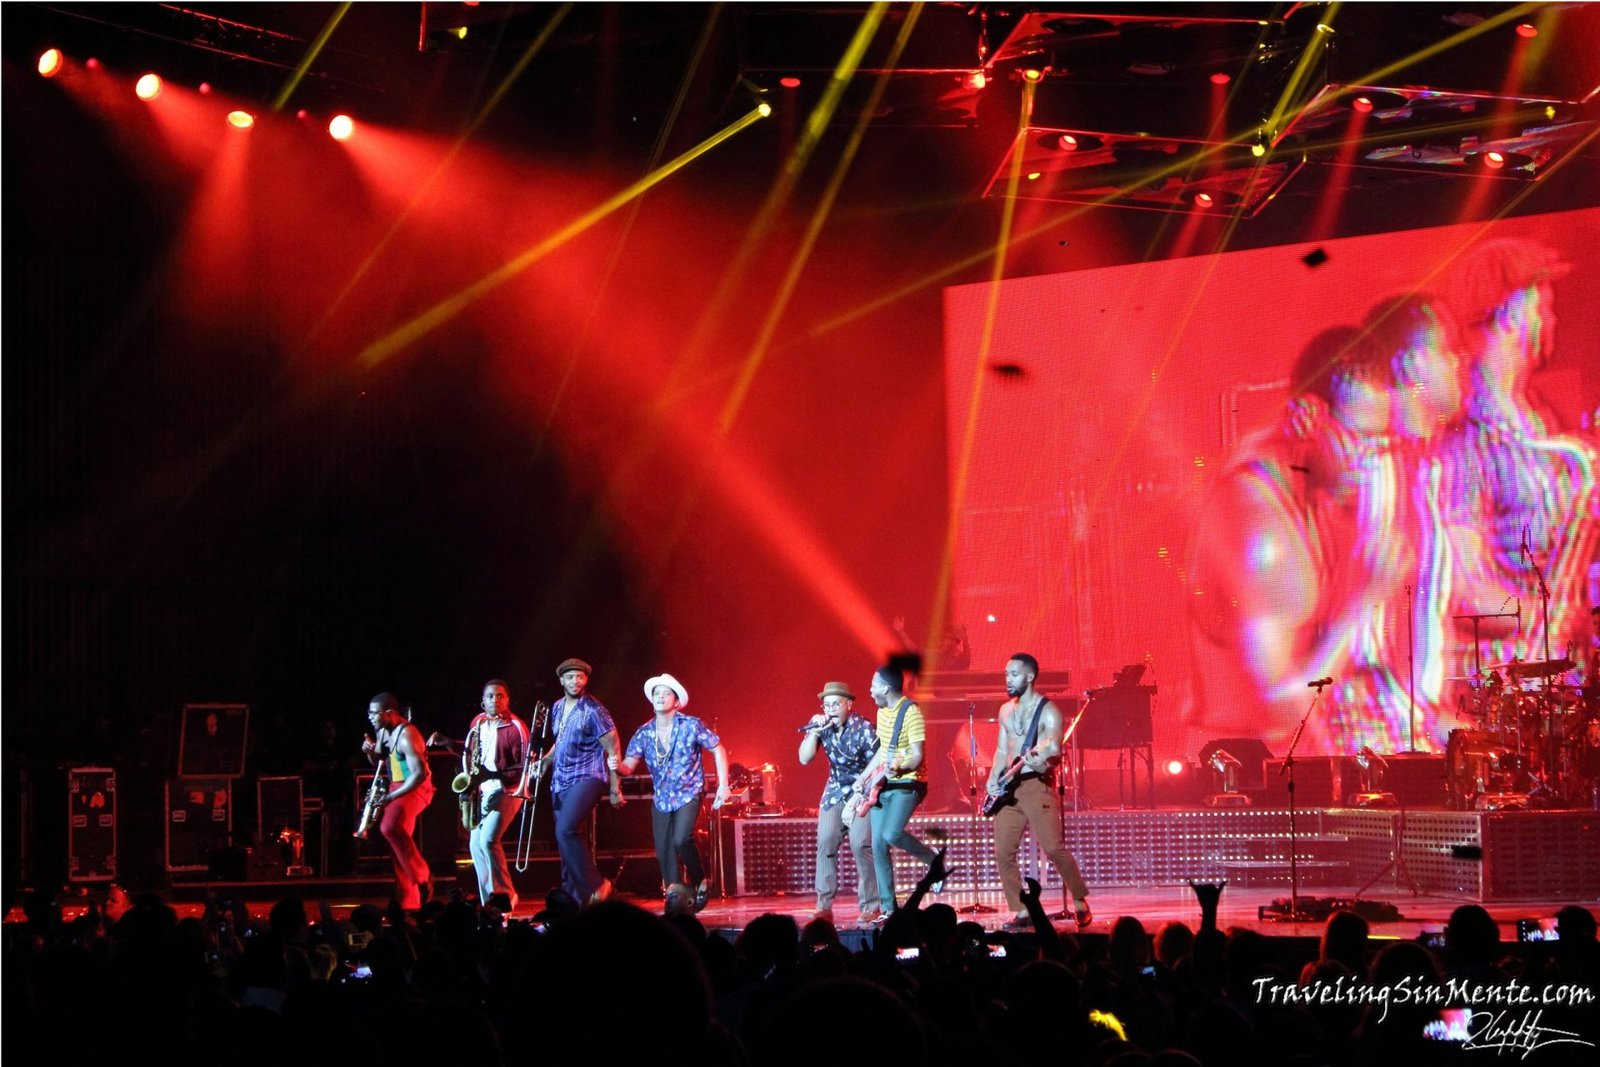 Bruno Mars and Aloe blacc in concert